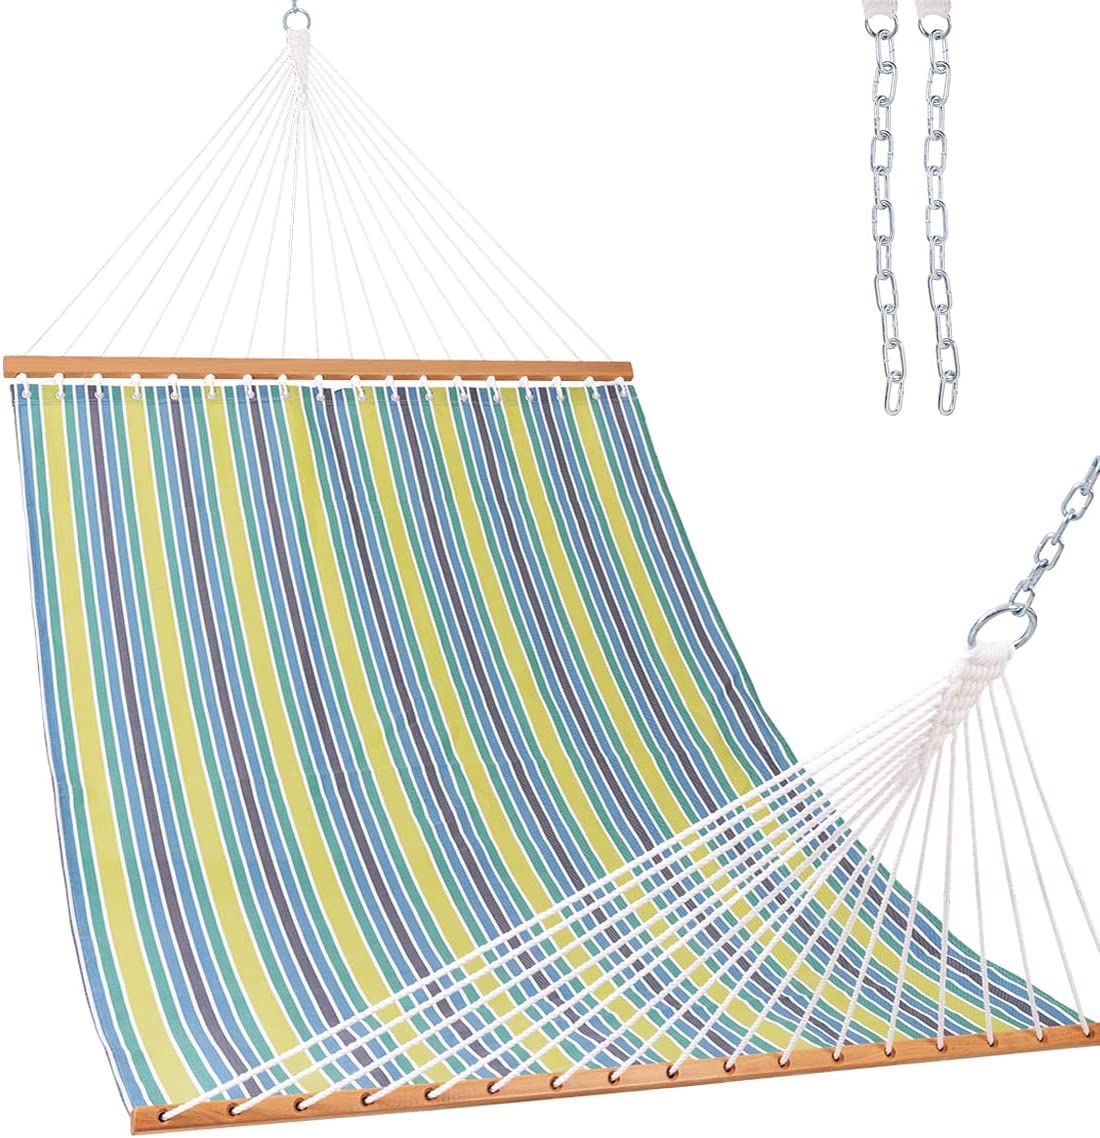 Quick Dry Hammock with Spreader Bar 2 Person Double Hammock with Chains Outdoor Outside Patio Poolside Backyard Beach 450 lbs Capacity Blue/Green - image 1 of 16